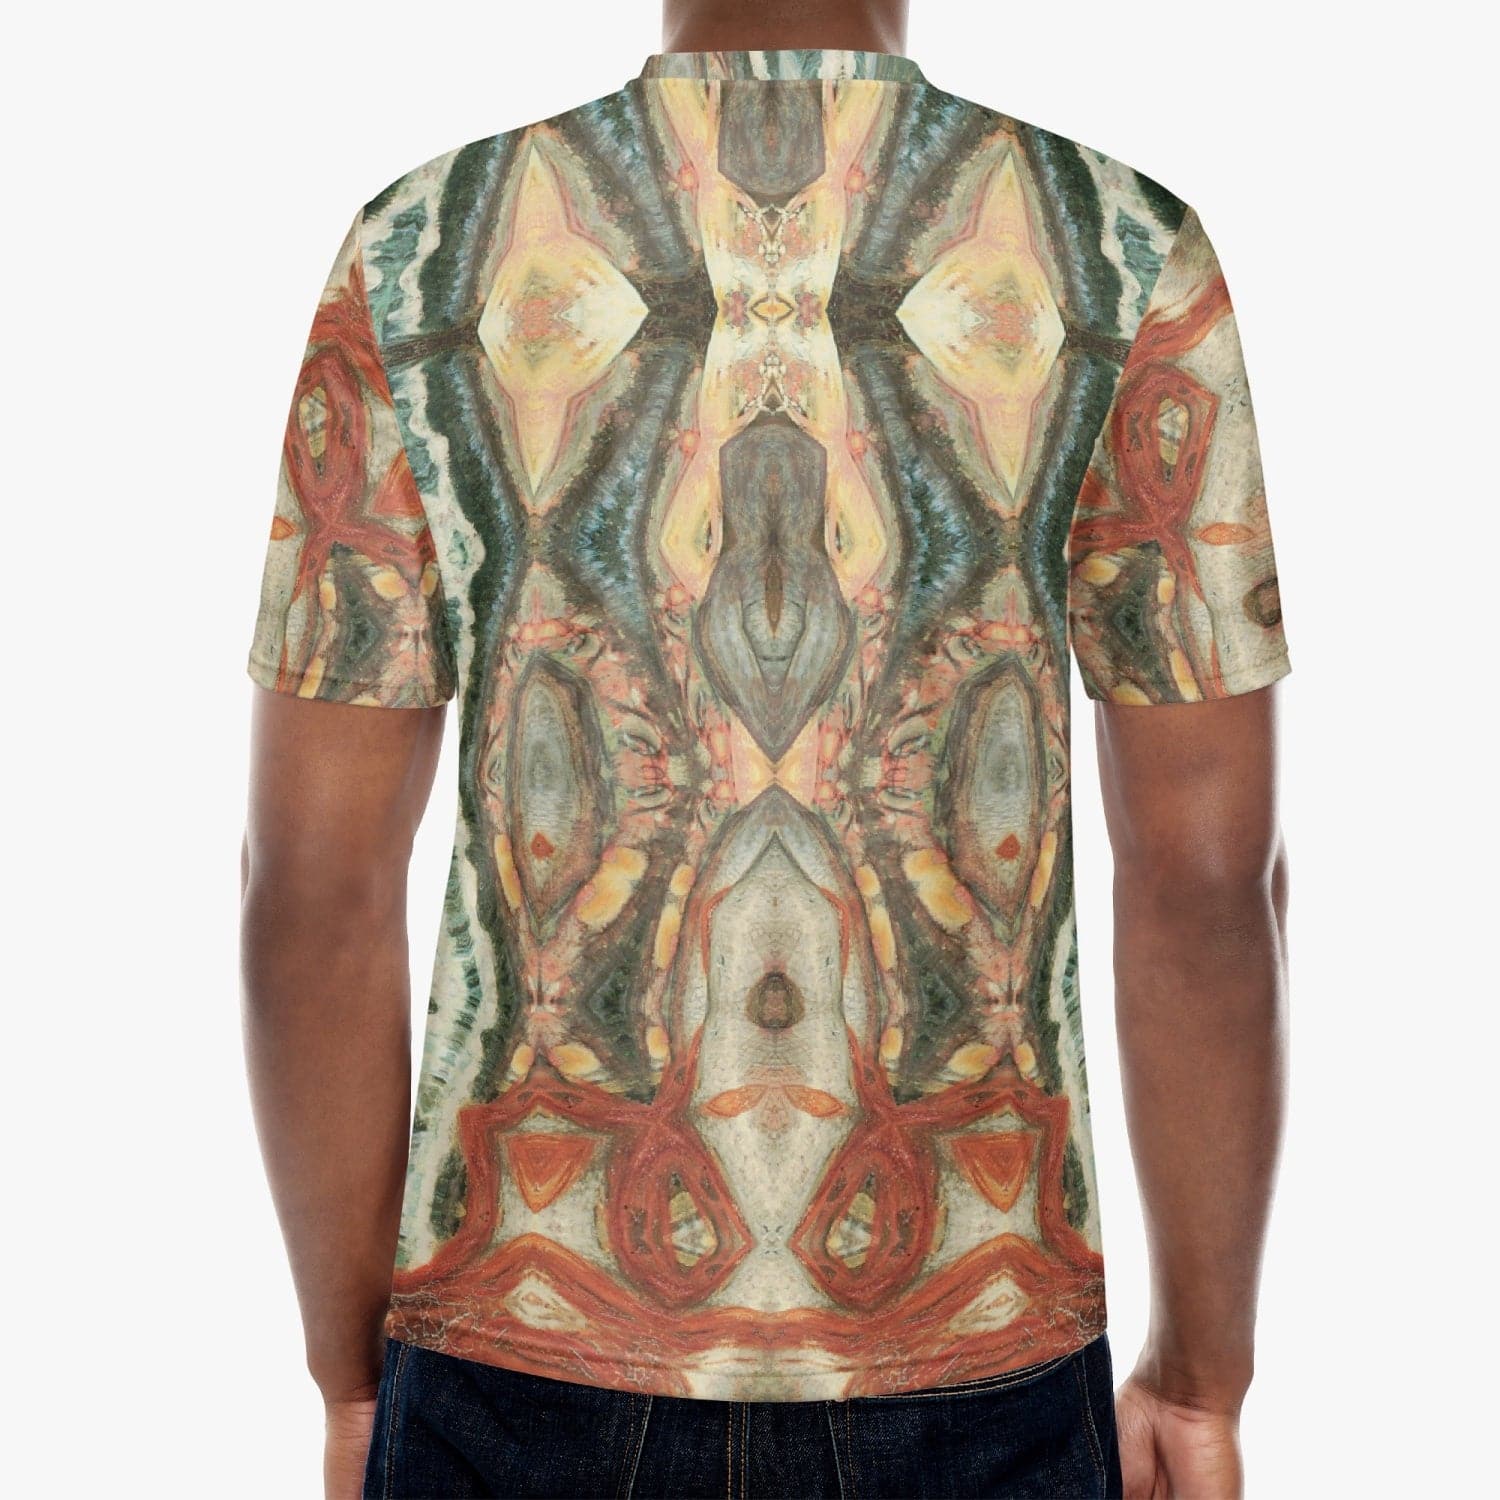 Handmade Alpha and Omega Multi Colored Pattern T-shirt for Men by Sensus Studio Design